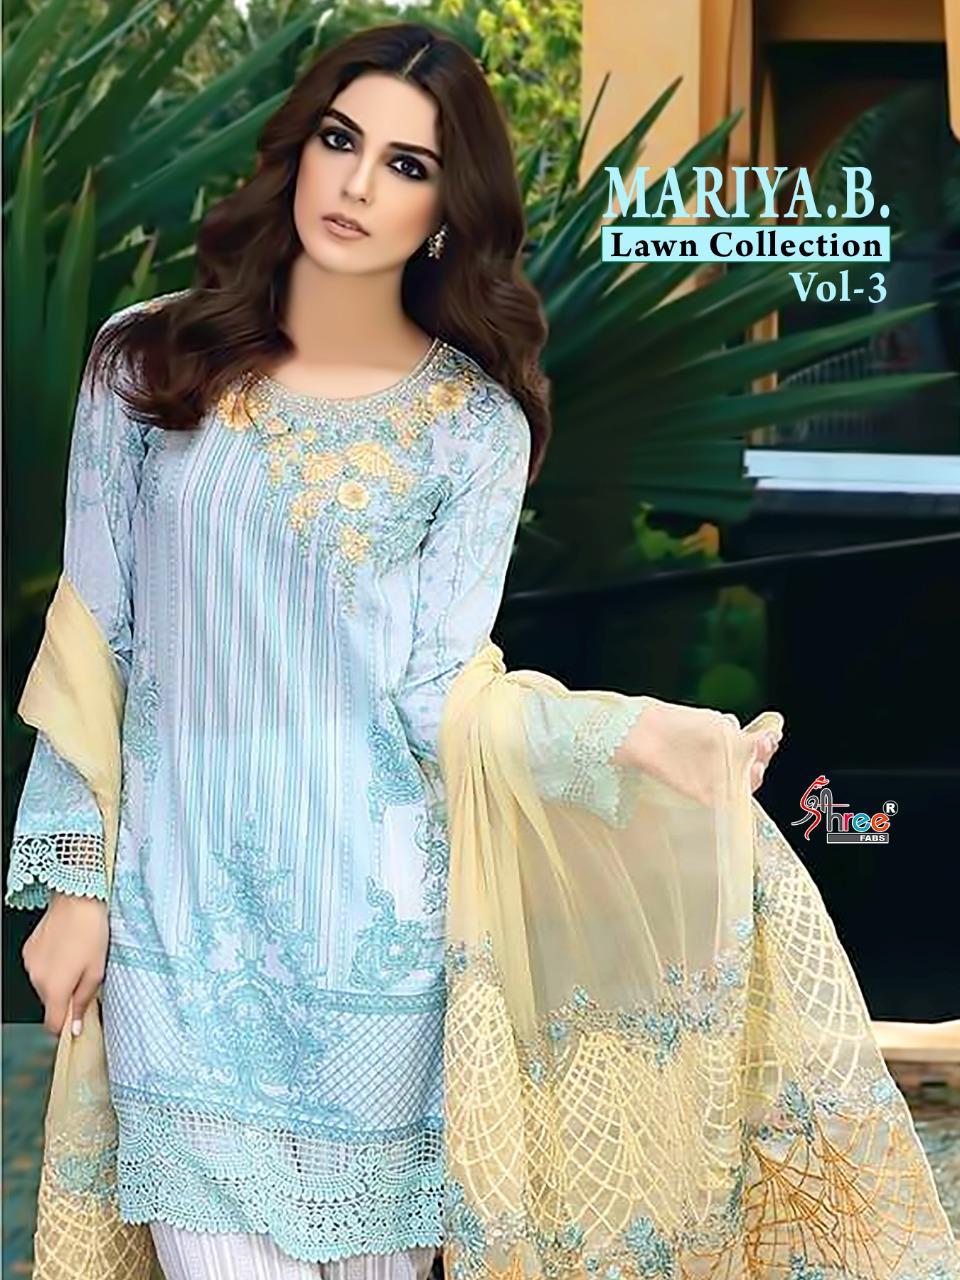 Shree Fabs Maria B Lawn Collection Vol 3 Printed Cambric Cot...